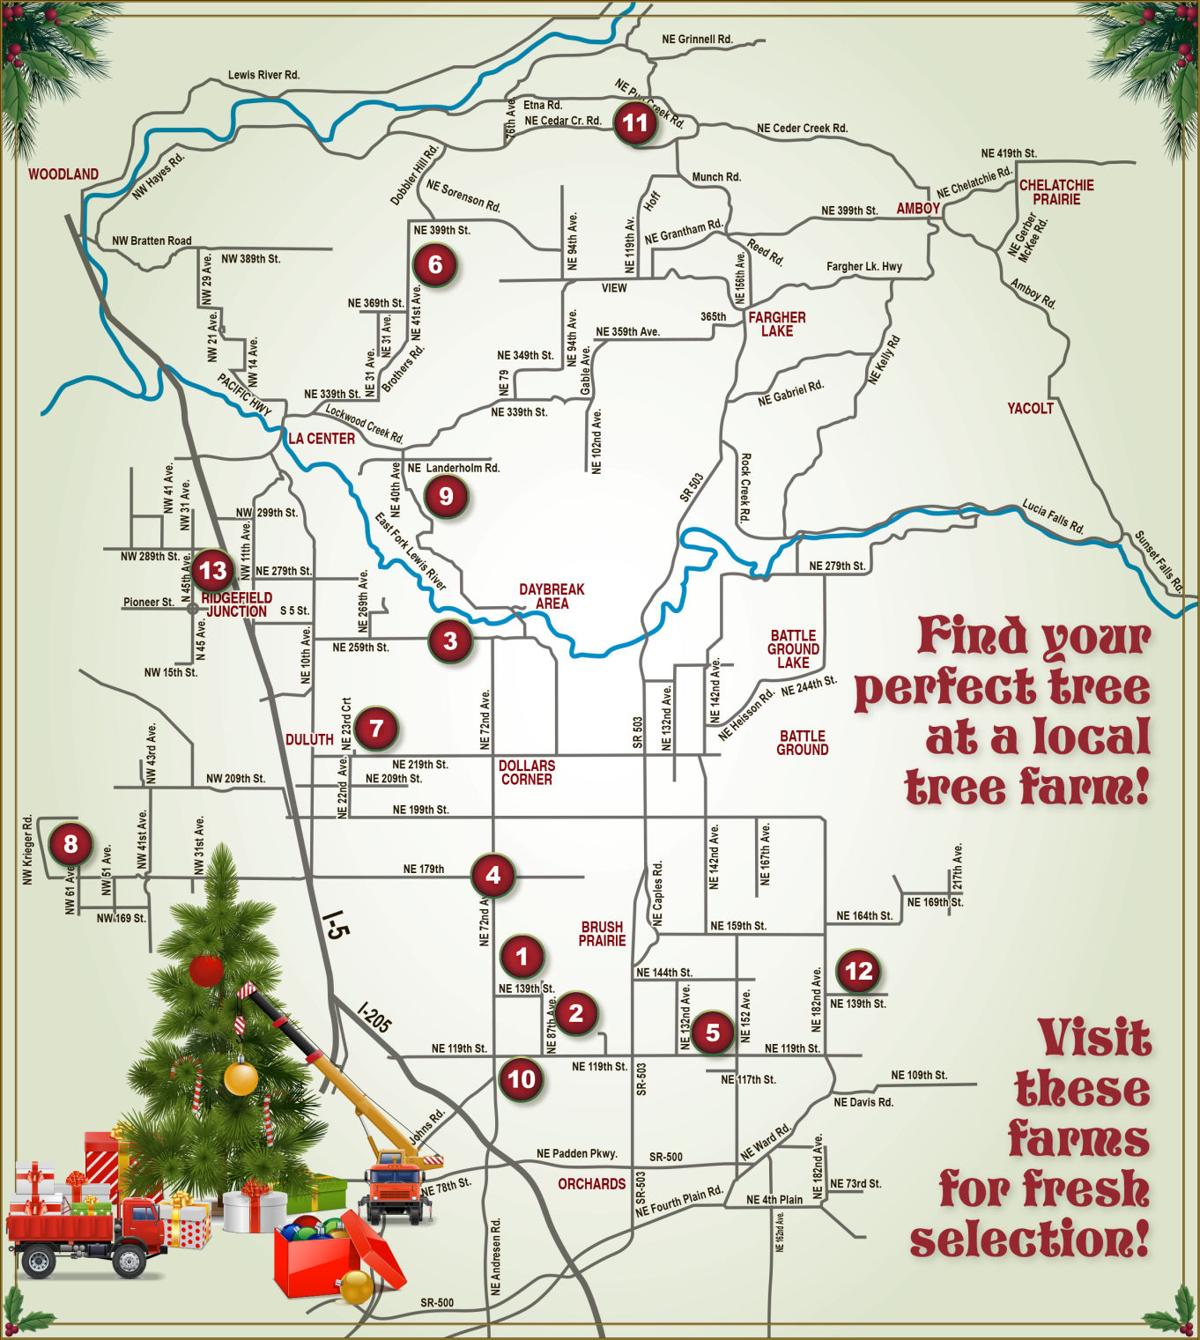 U-cut Christmas tree farms are ready for holidays | Life | thereflector.com